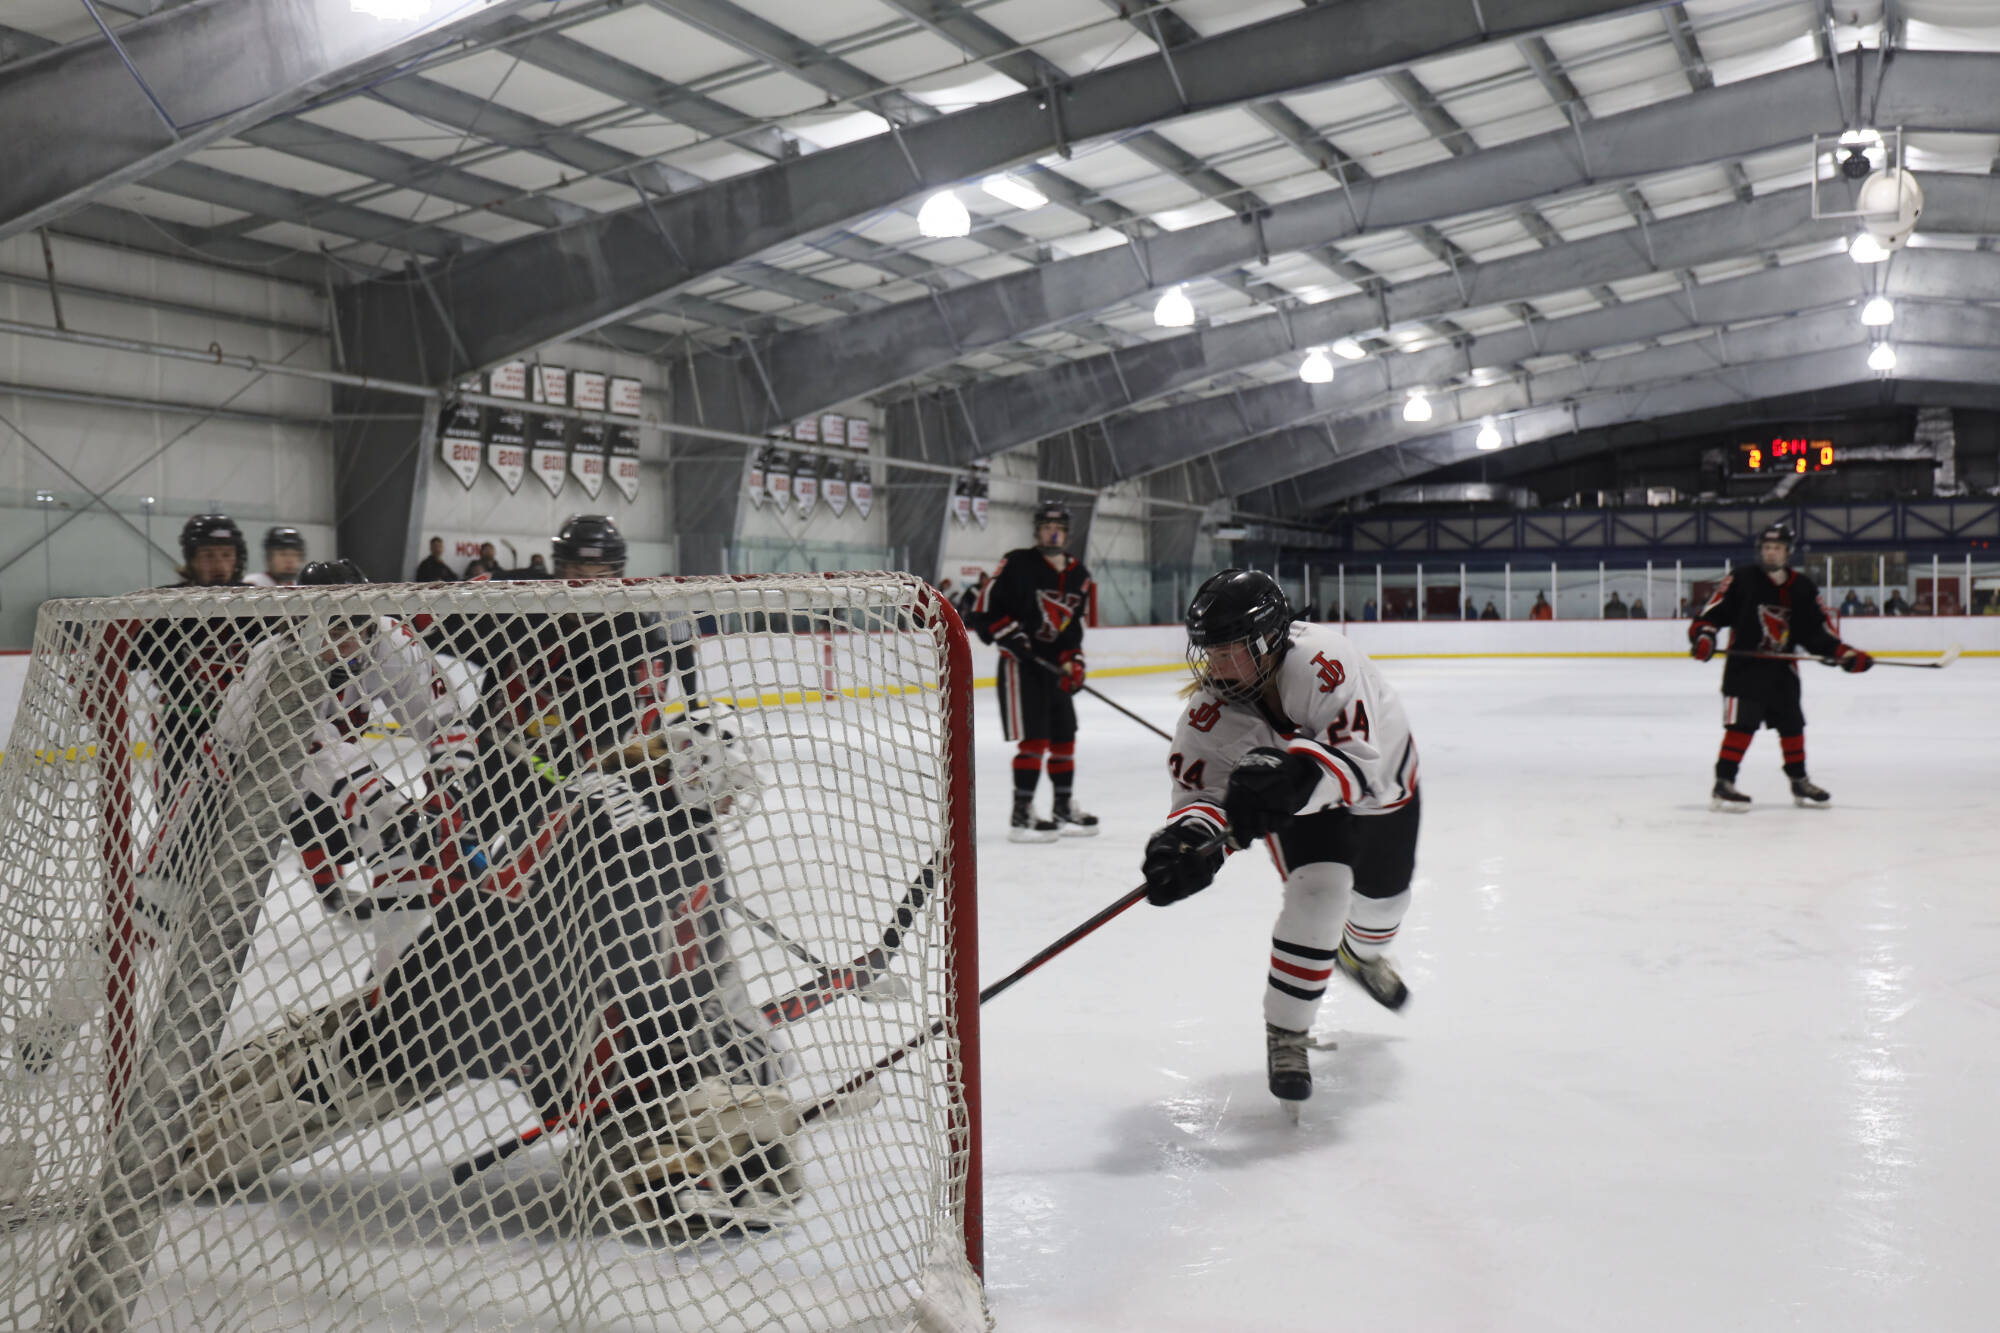 Clarise Larson / Juneau Empire 
Senior assistant captain Anna Dale attempts to stuff the net during a home game between Juneau-Douglas High School: Yadaa.at Kalé Crimson Bears Varsity hockey team and the Kenai Central Kardinals at the Treadwell Arena in early December.